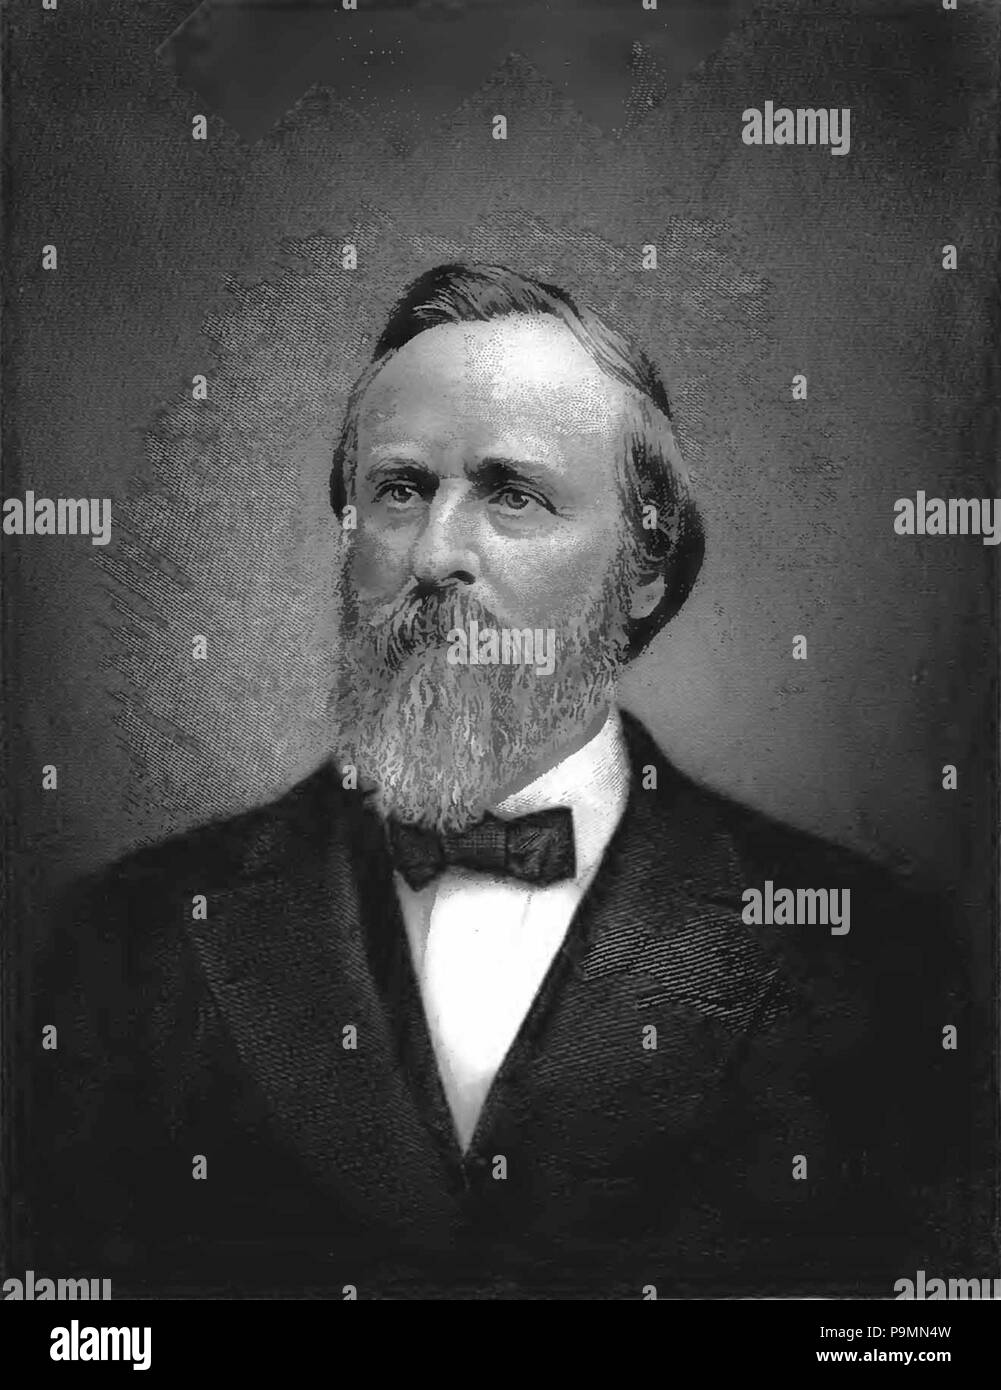 rutherford b hayes young